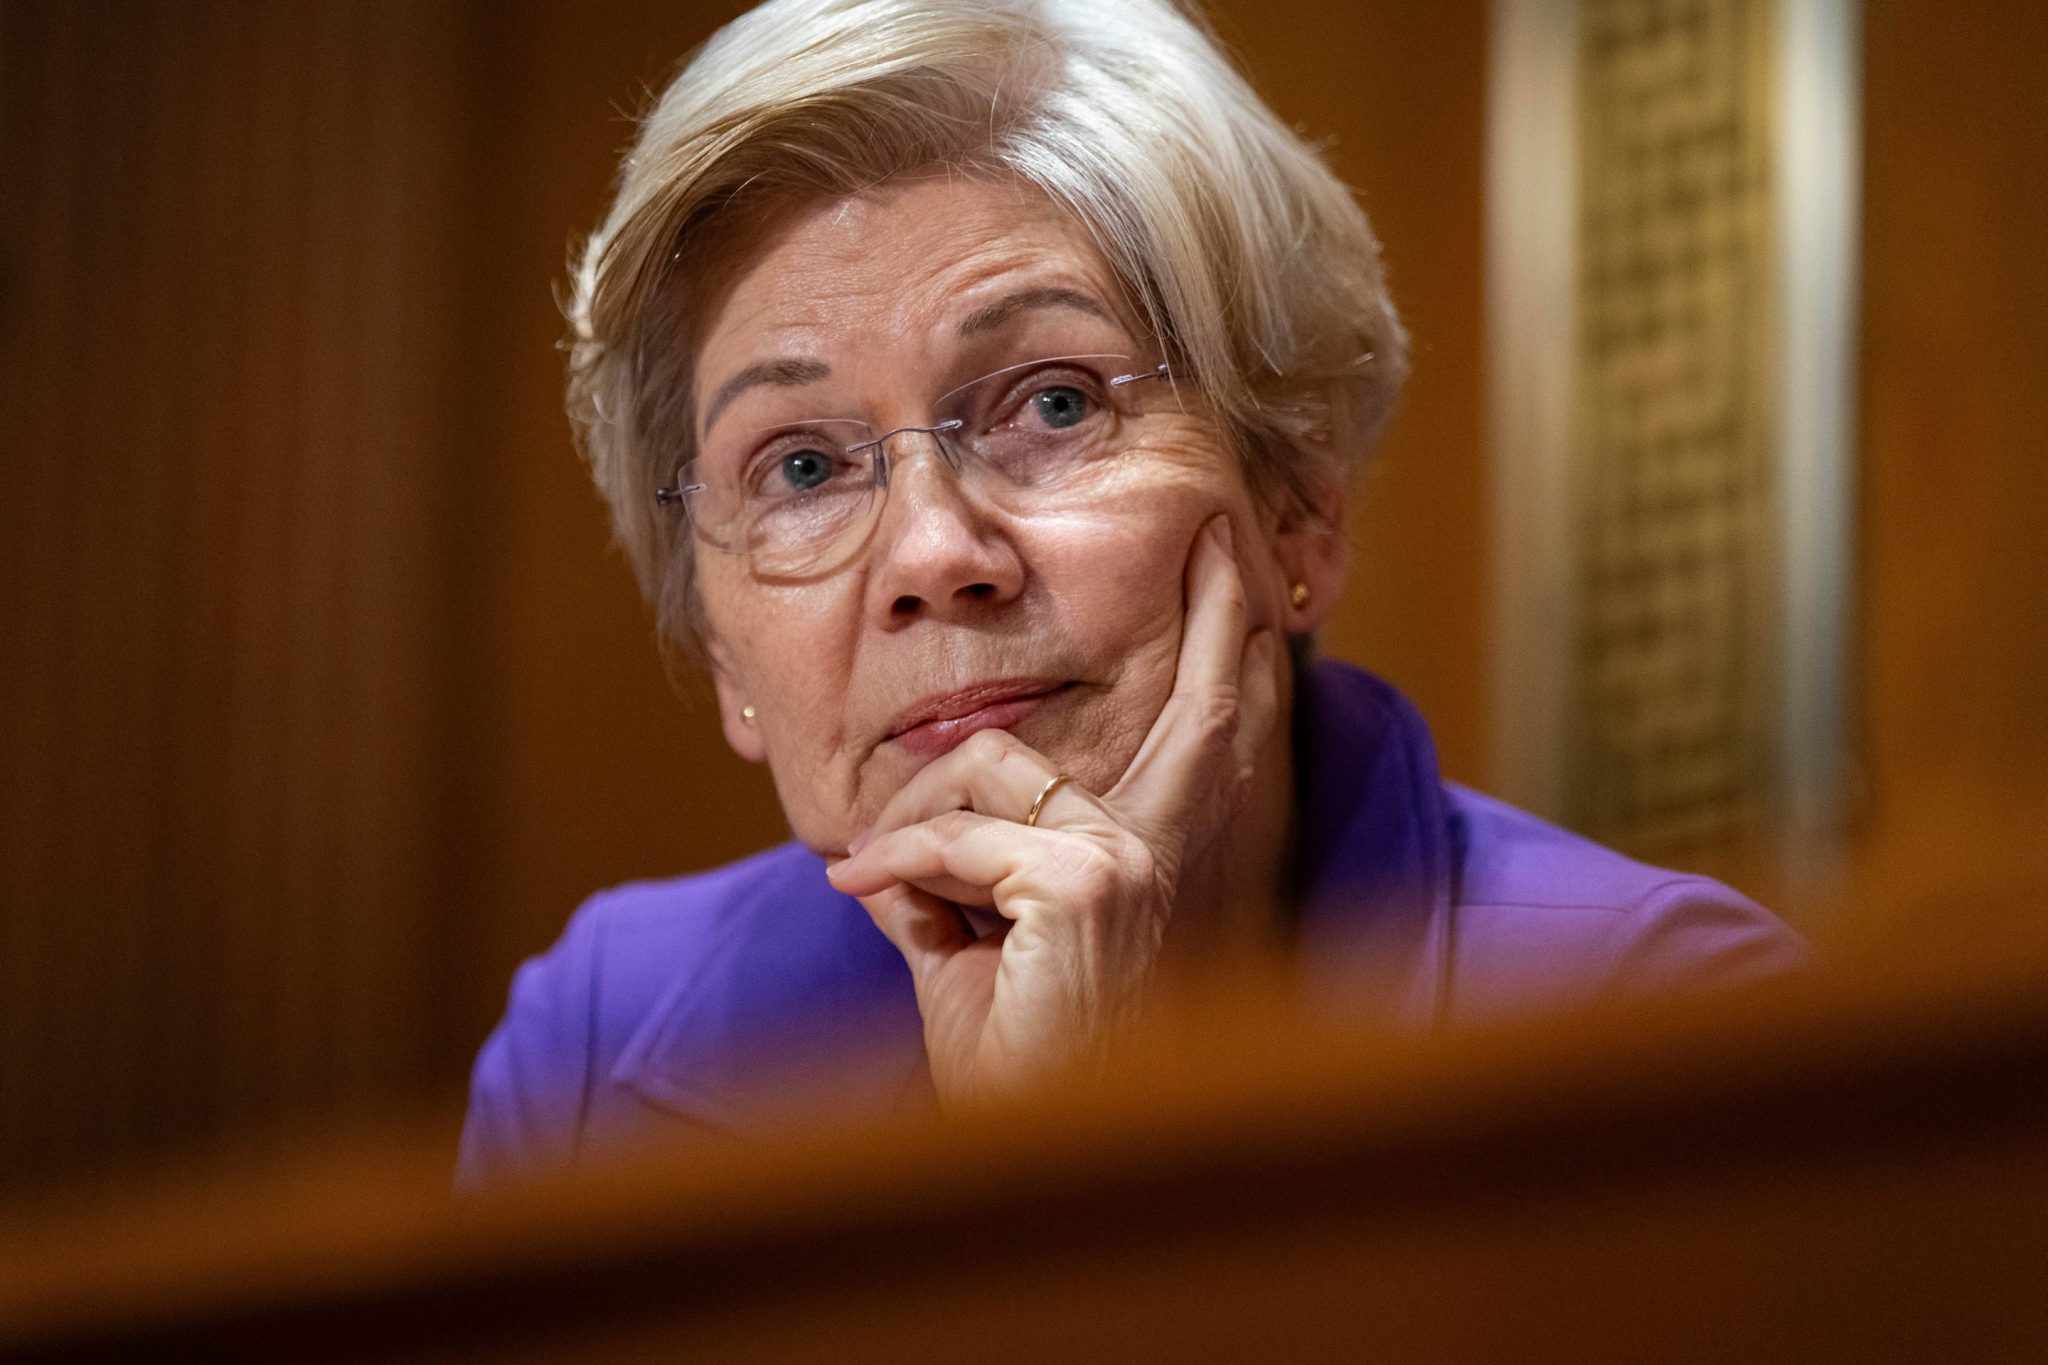 elizabeth warren is furious about the ‘full-blown housing crisis’ and she’s targeting jerome powell’s ‘troubling rate hikes’